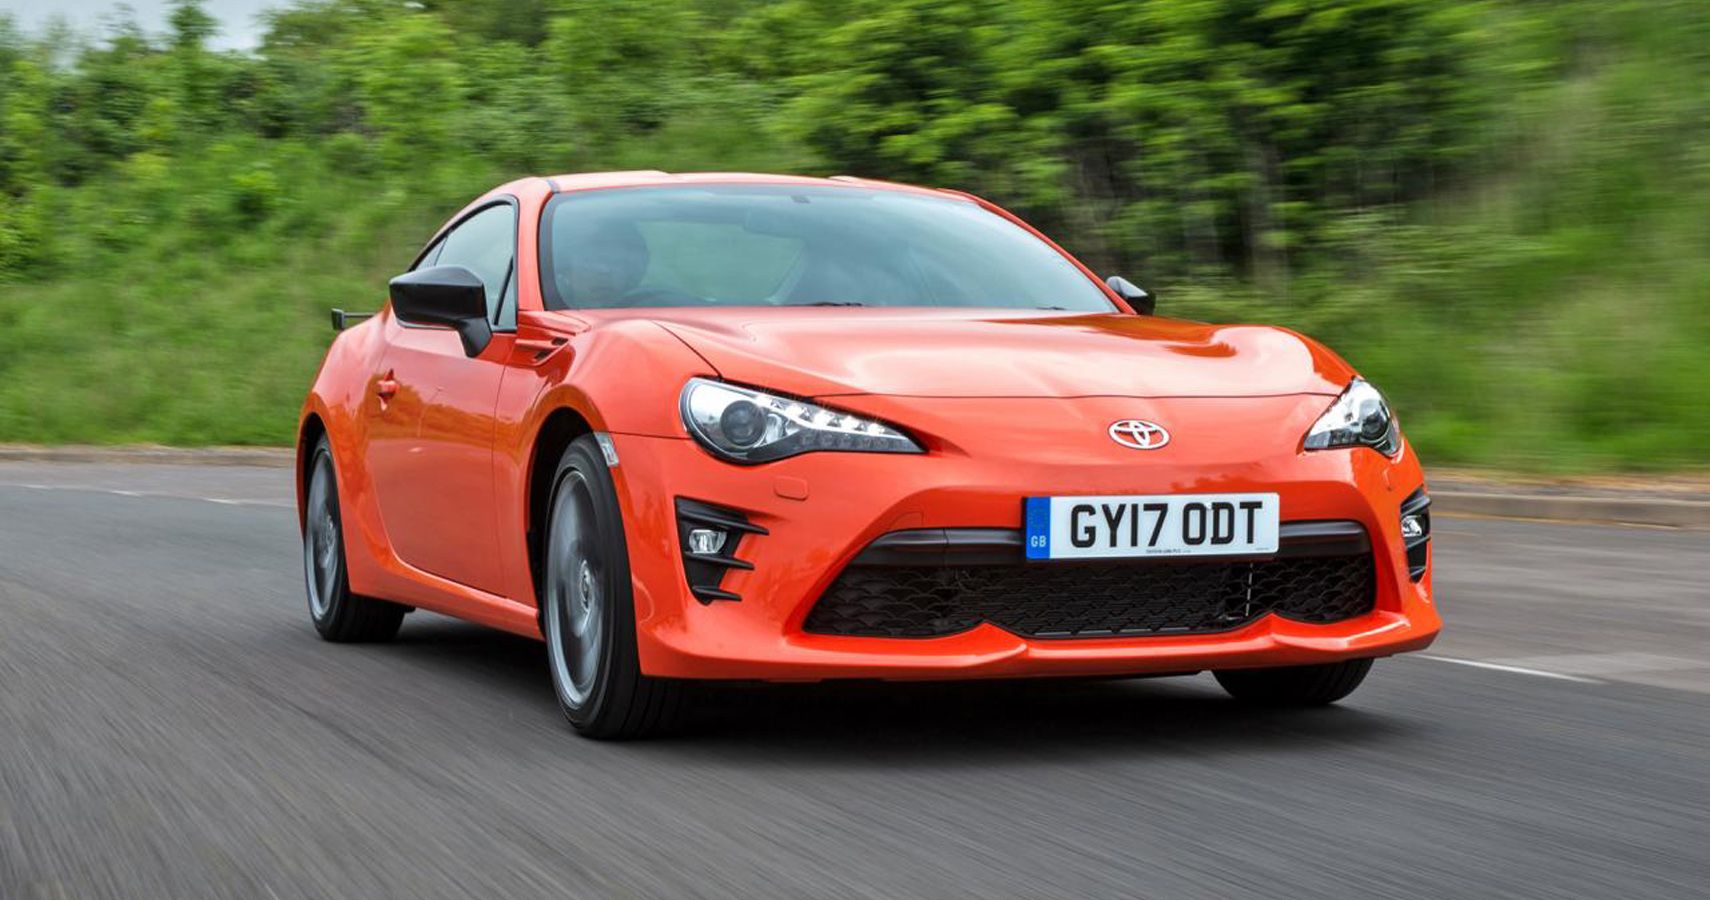 These Sports Cars Are Brand-New But They're Still Slower Than Classic Muscle Cars